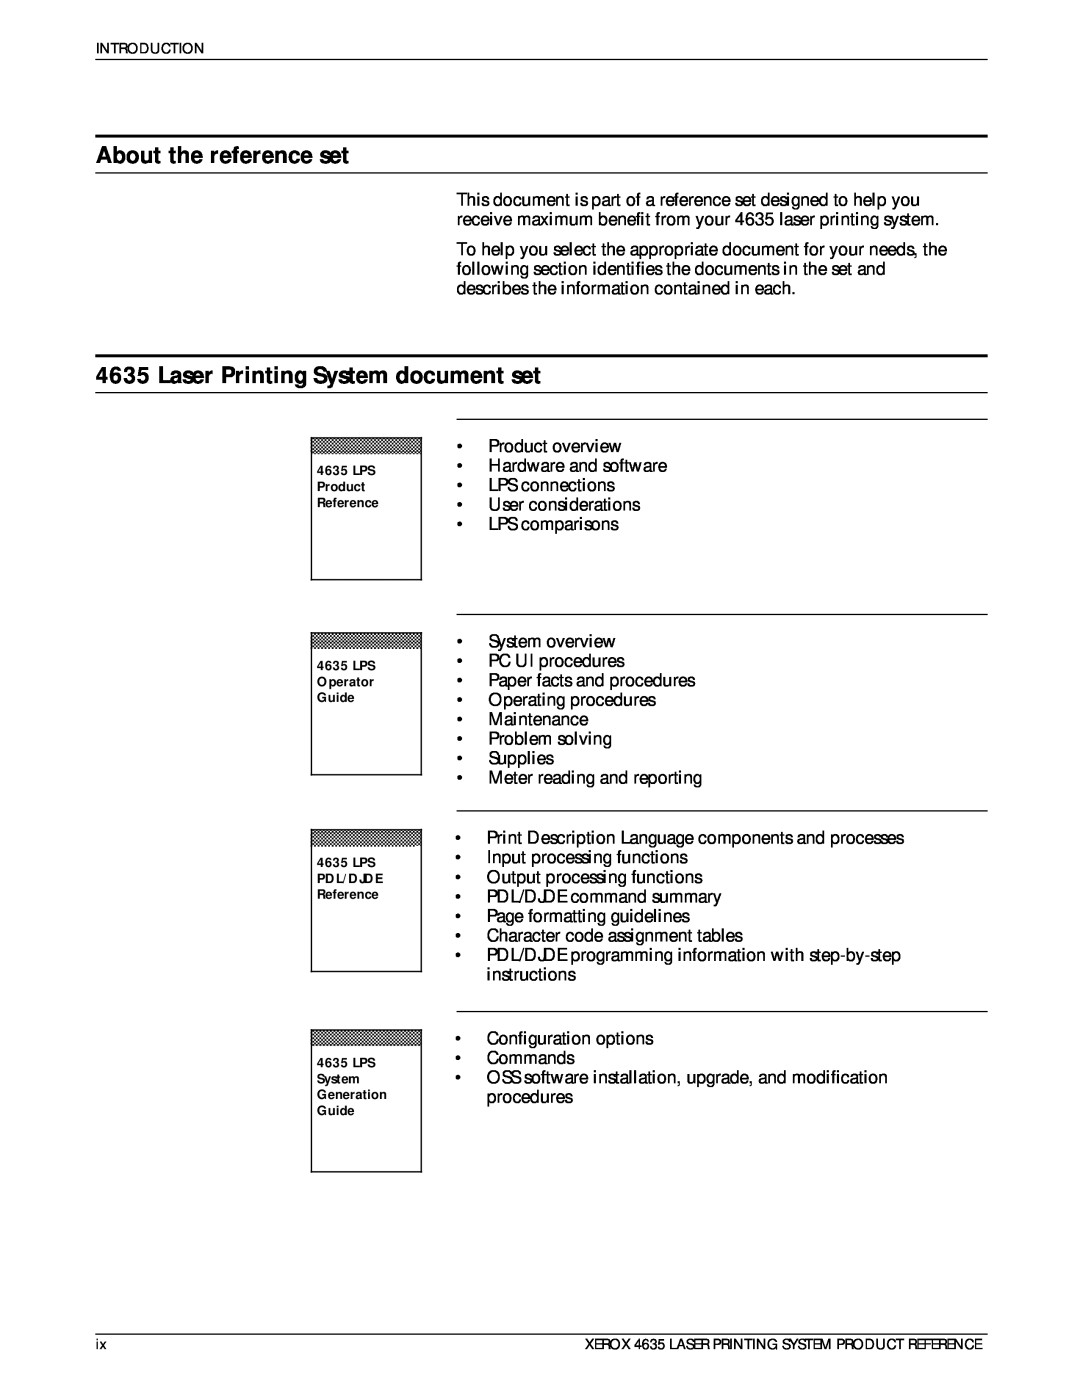 Xerox 721P83071 manual About the reference set, Laser Printing System document set 